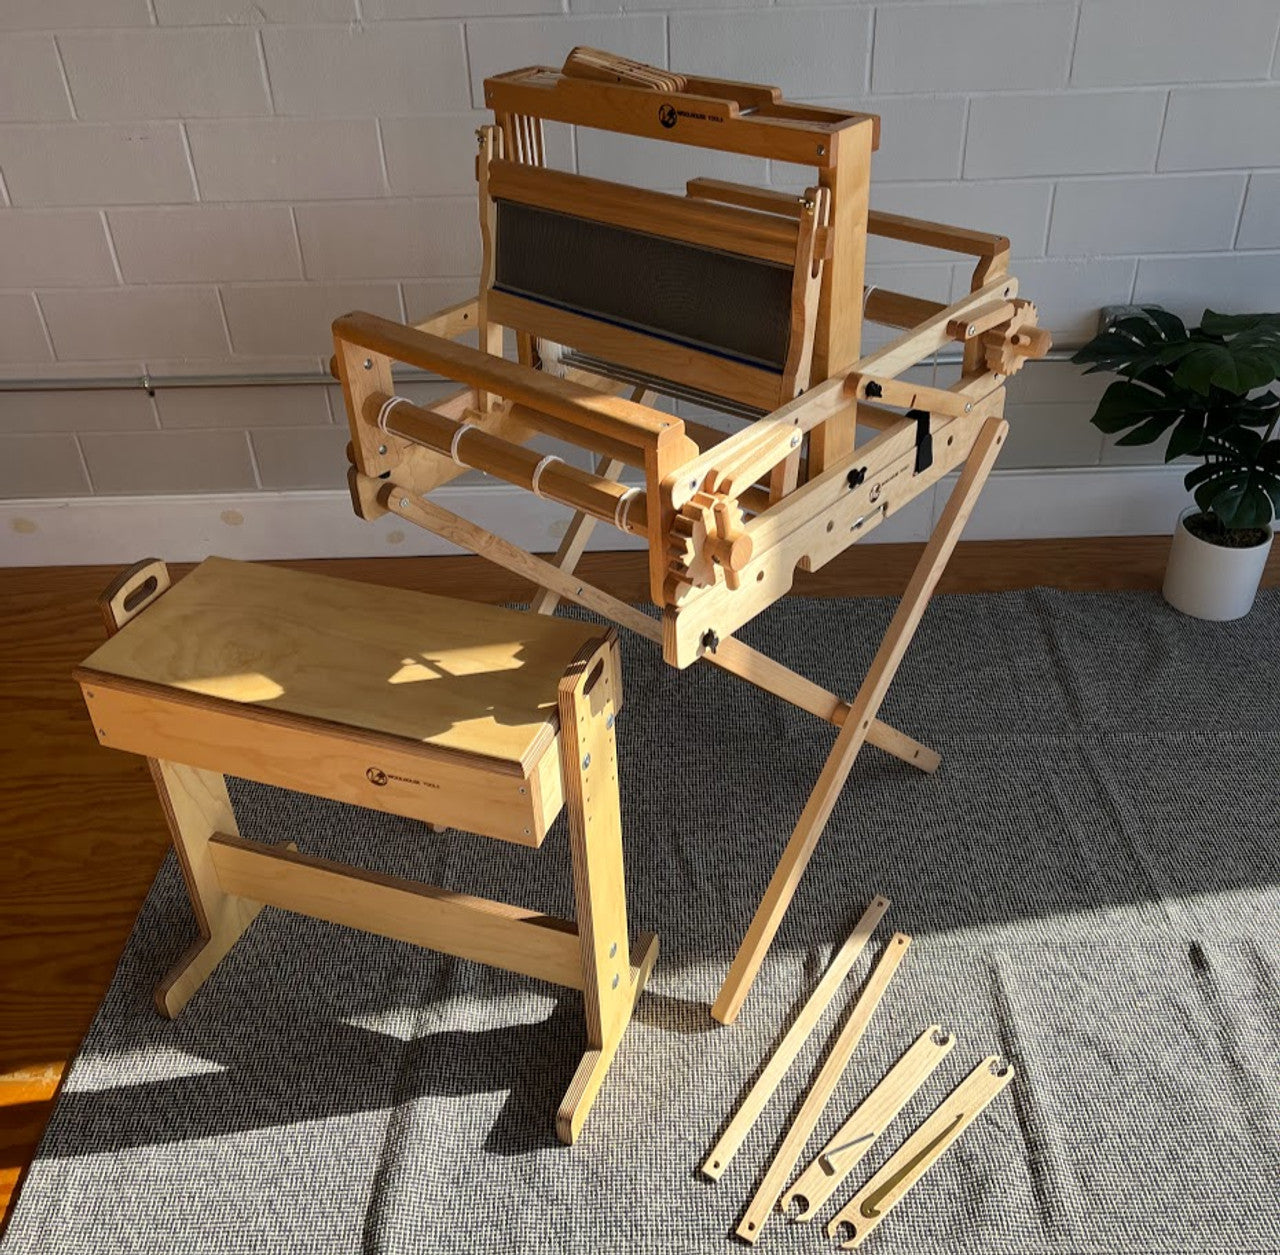 Norah 16" 8 Shaft Loom Package with Stand and Bench from Woolhouse Looms